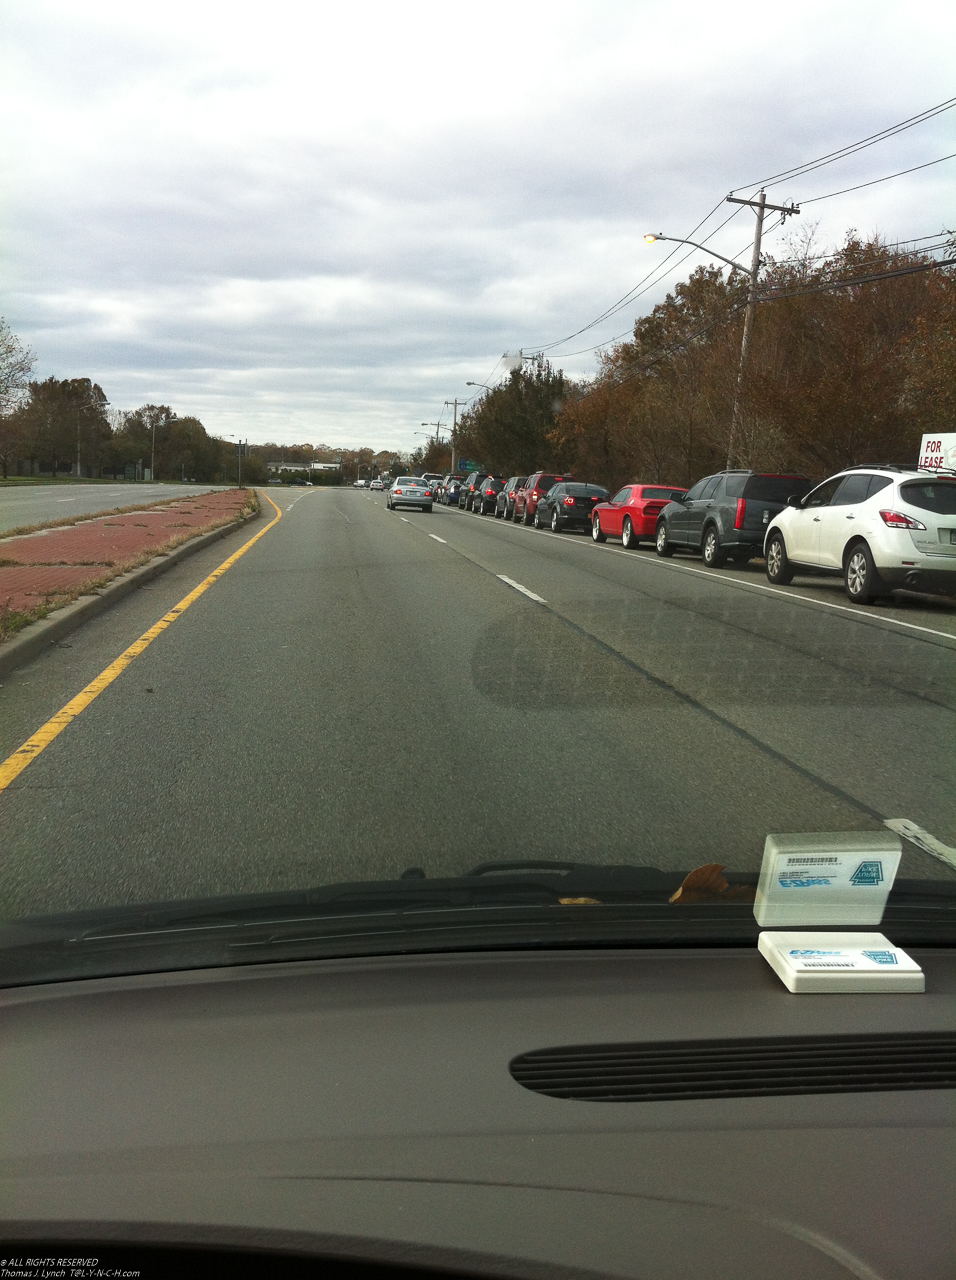 Hurricane Sandy come to town Nov 2012  ~~  Gas lines (over 3 hours IF you even get gas when you get there)